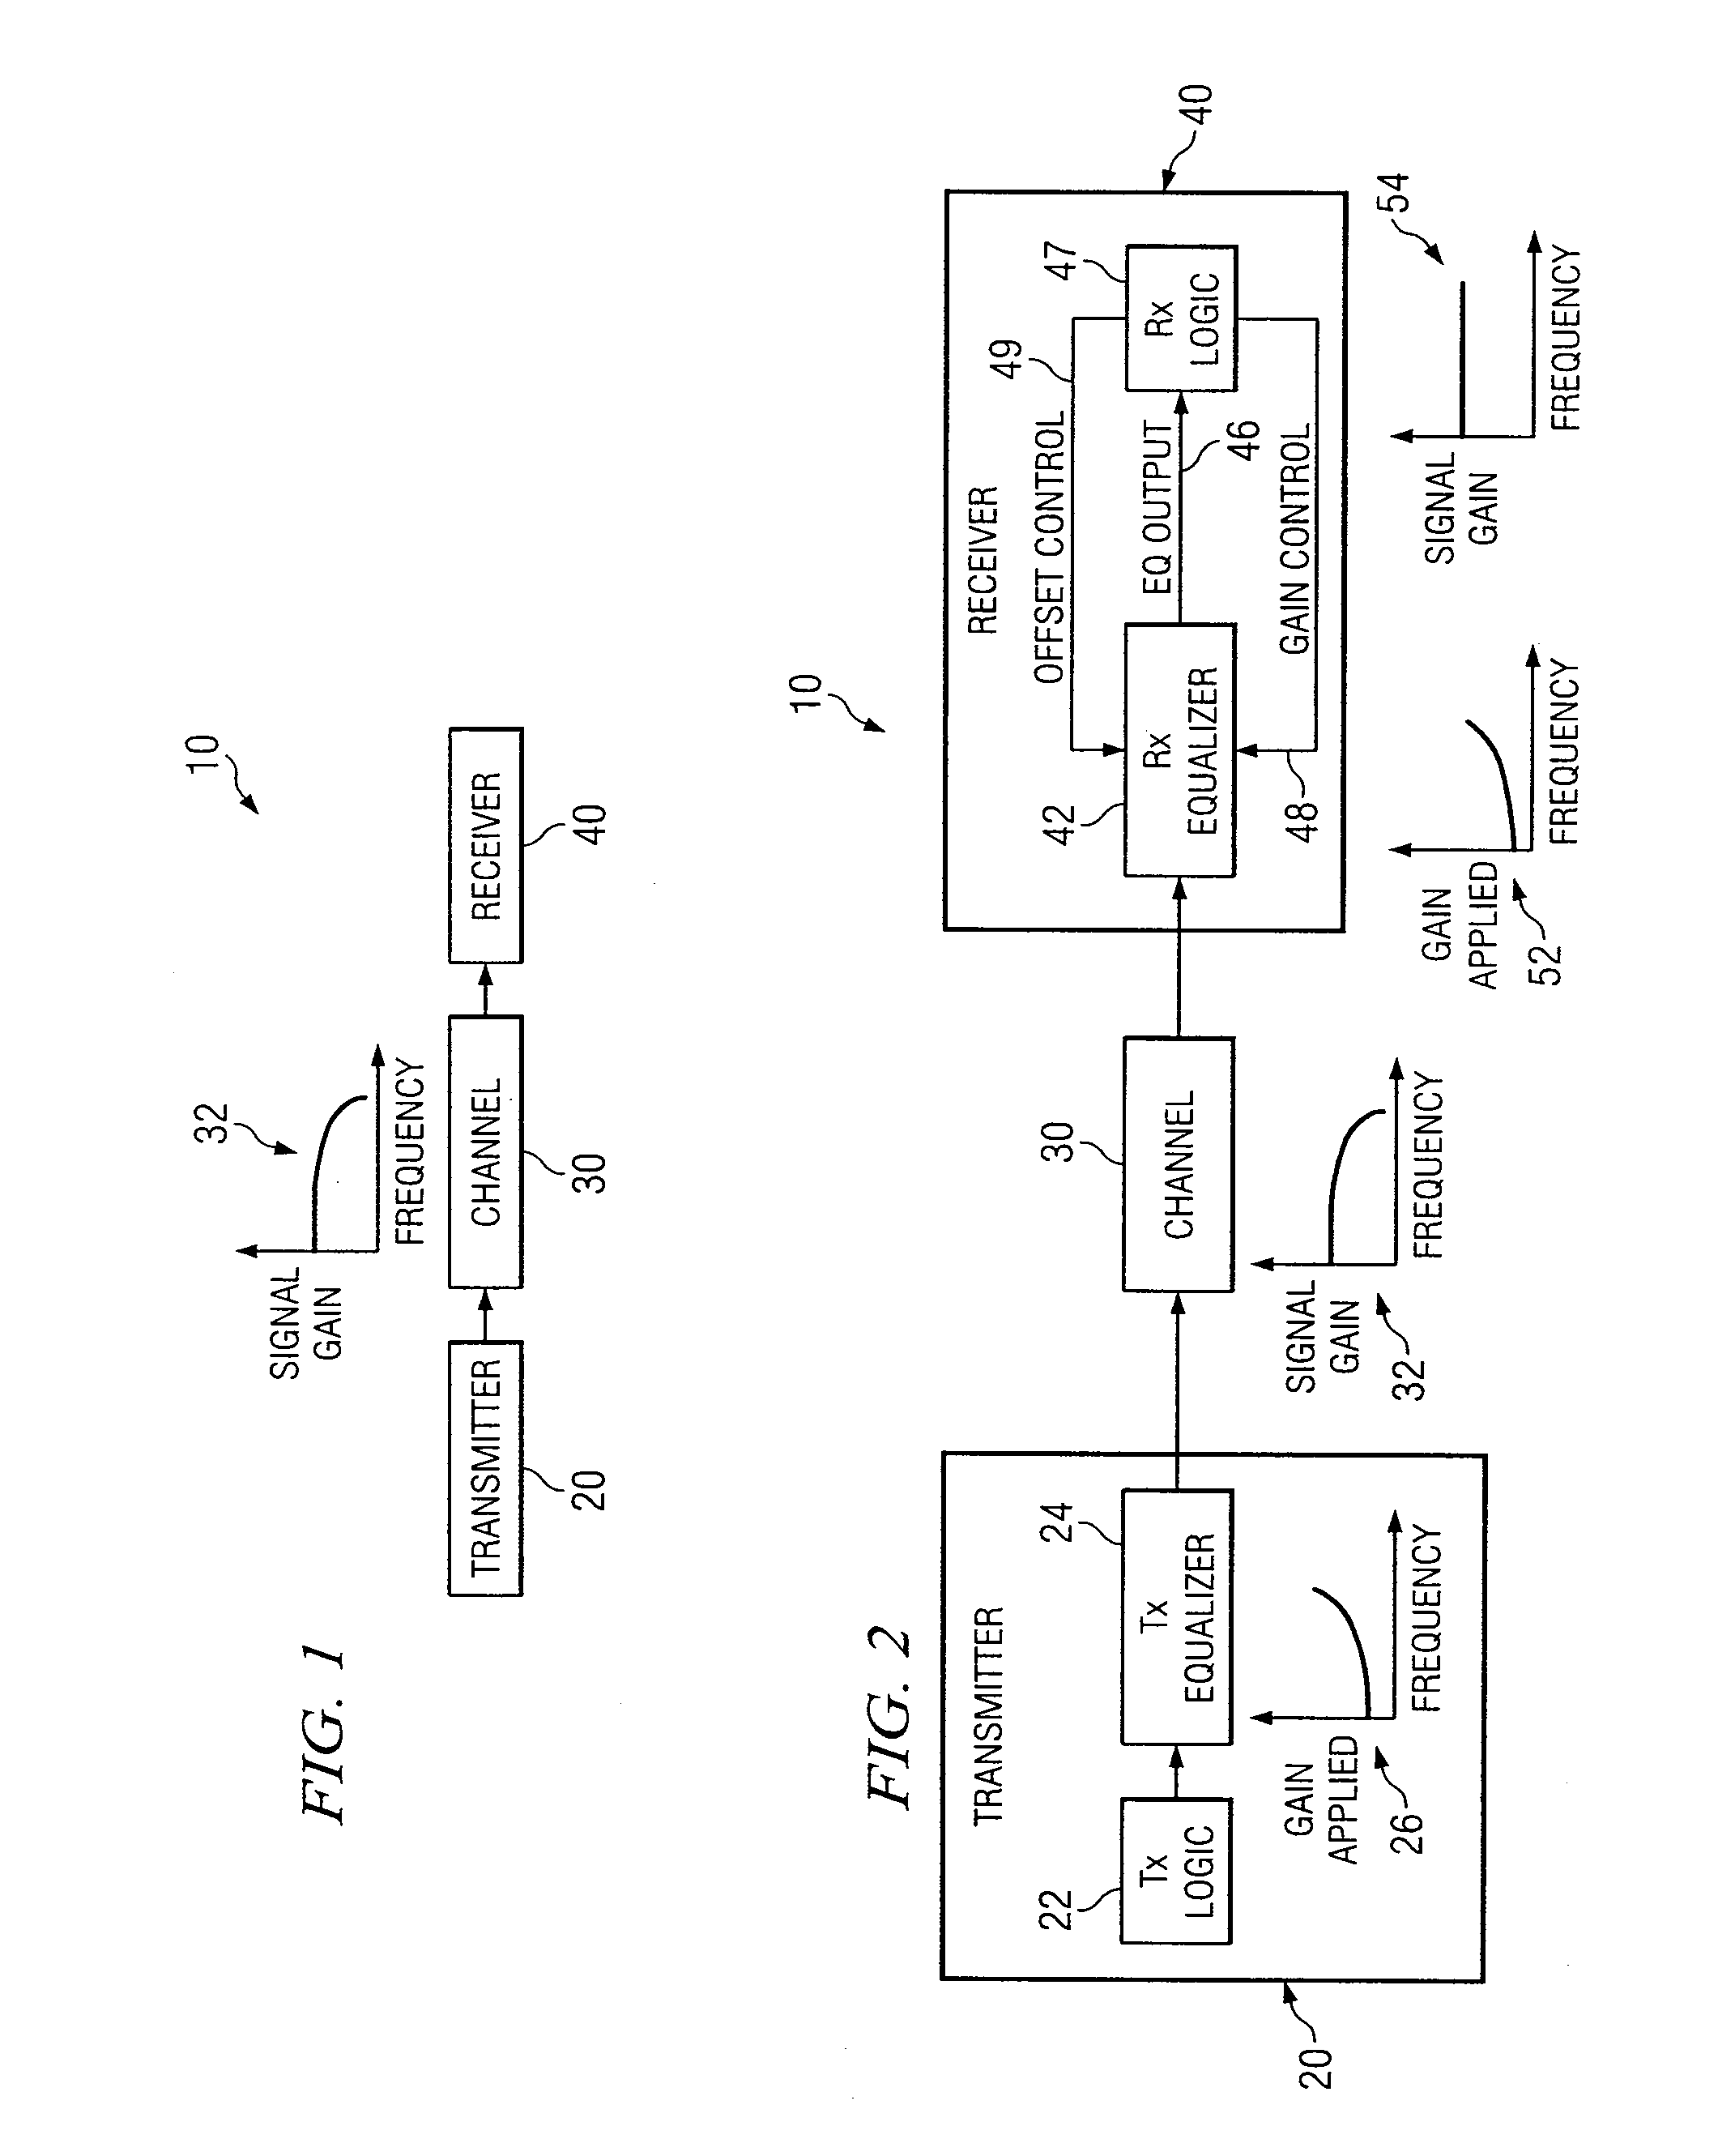 System and Method for the Adjustment of Offset Compensation Applied to a Signal